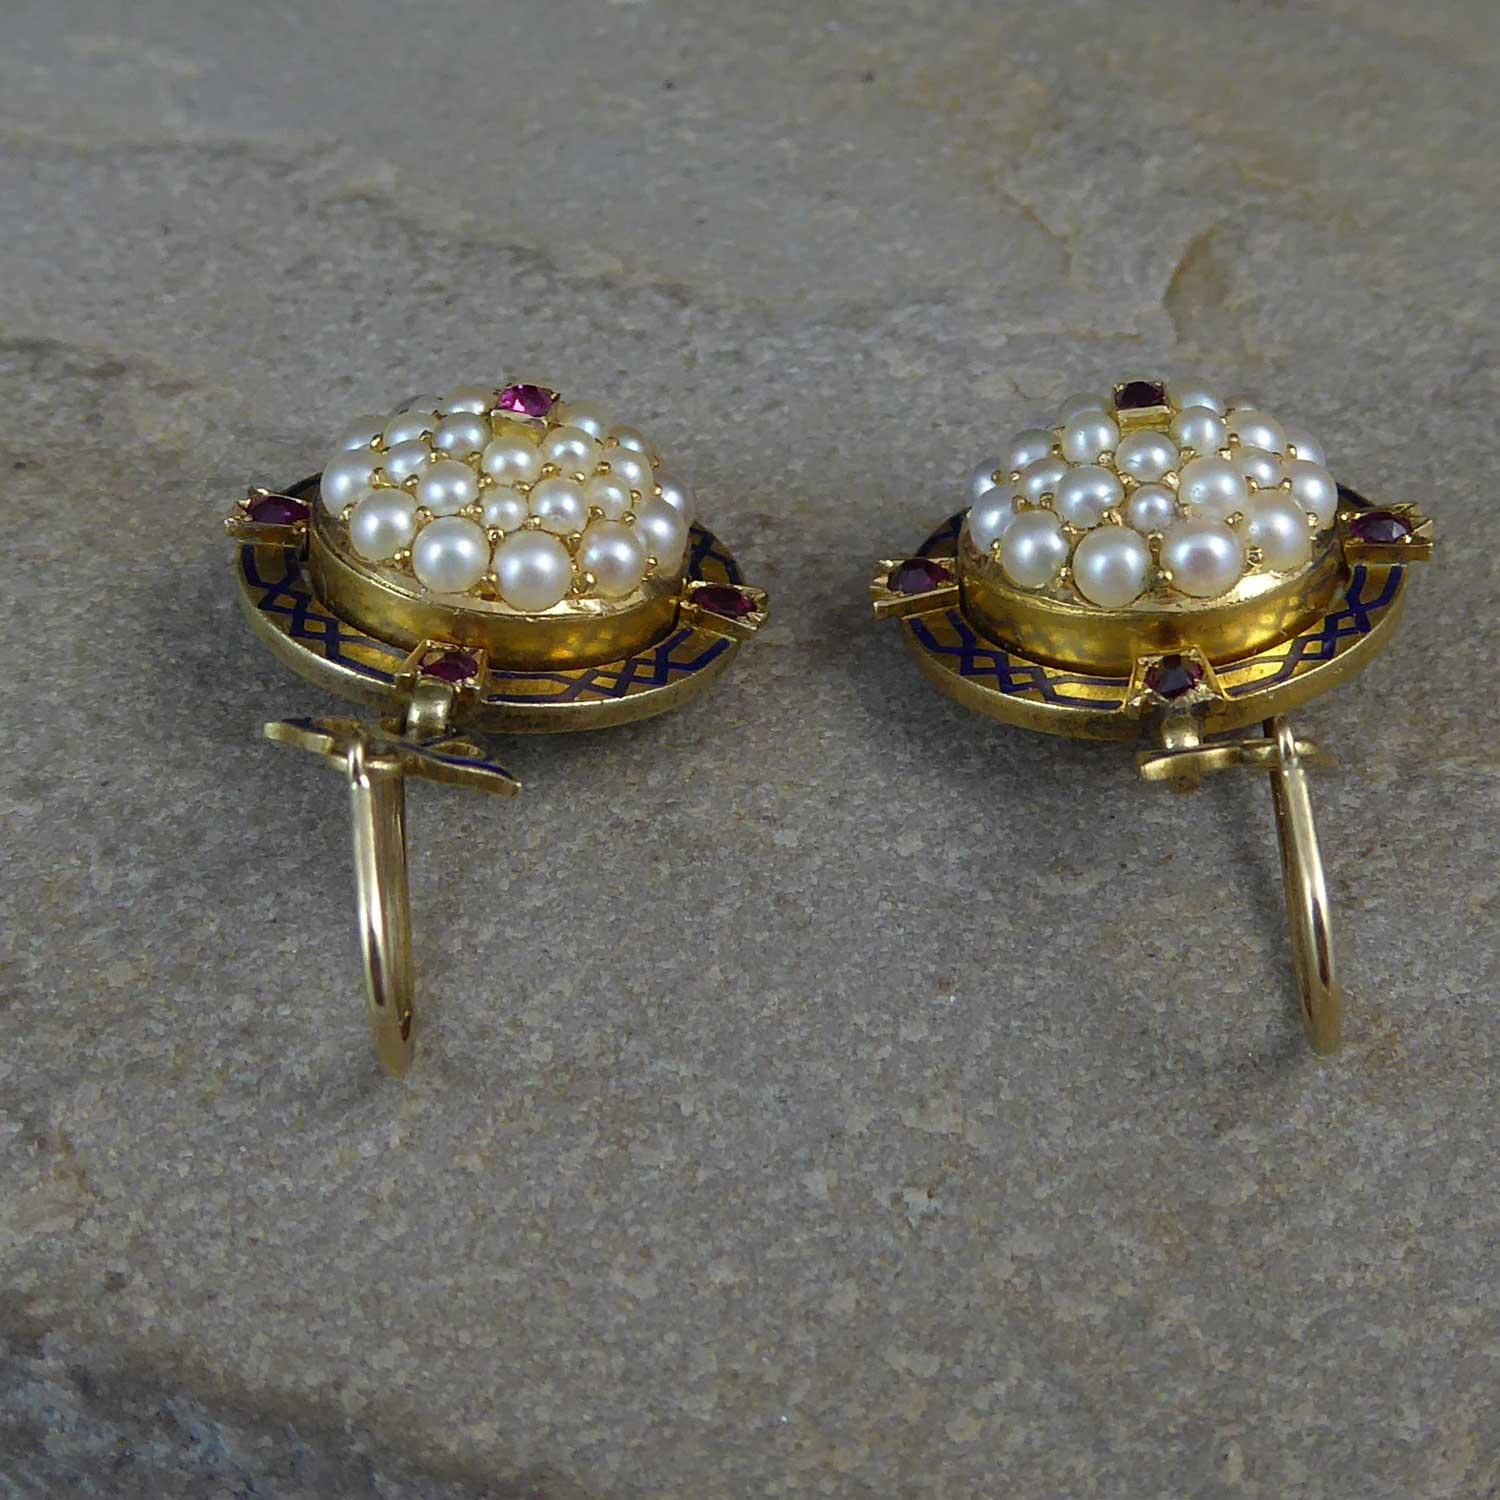 Antique Victorian Ruby Pearl Drop Earrings, circa 1880s, 15 Carat Gold 3